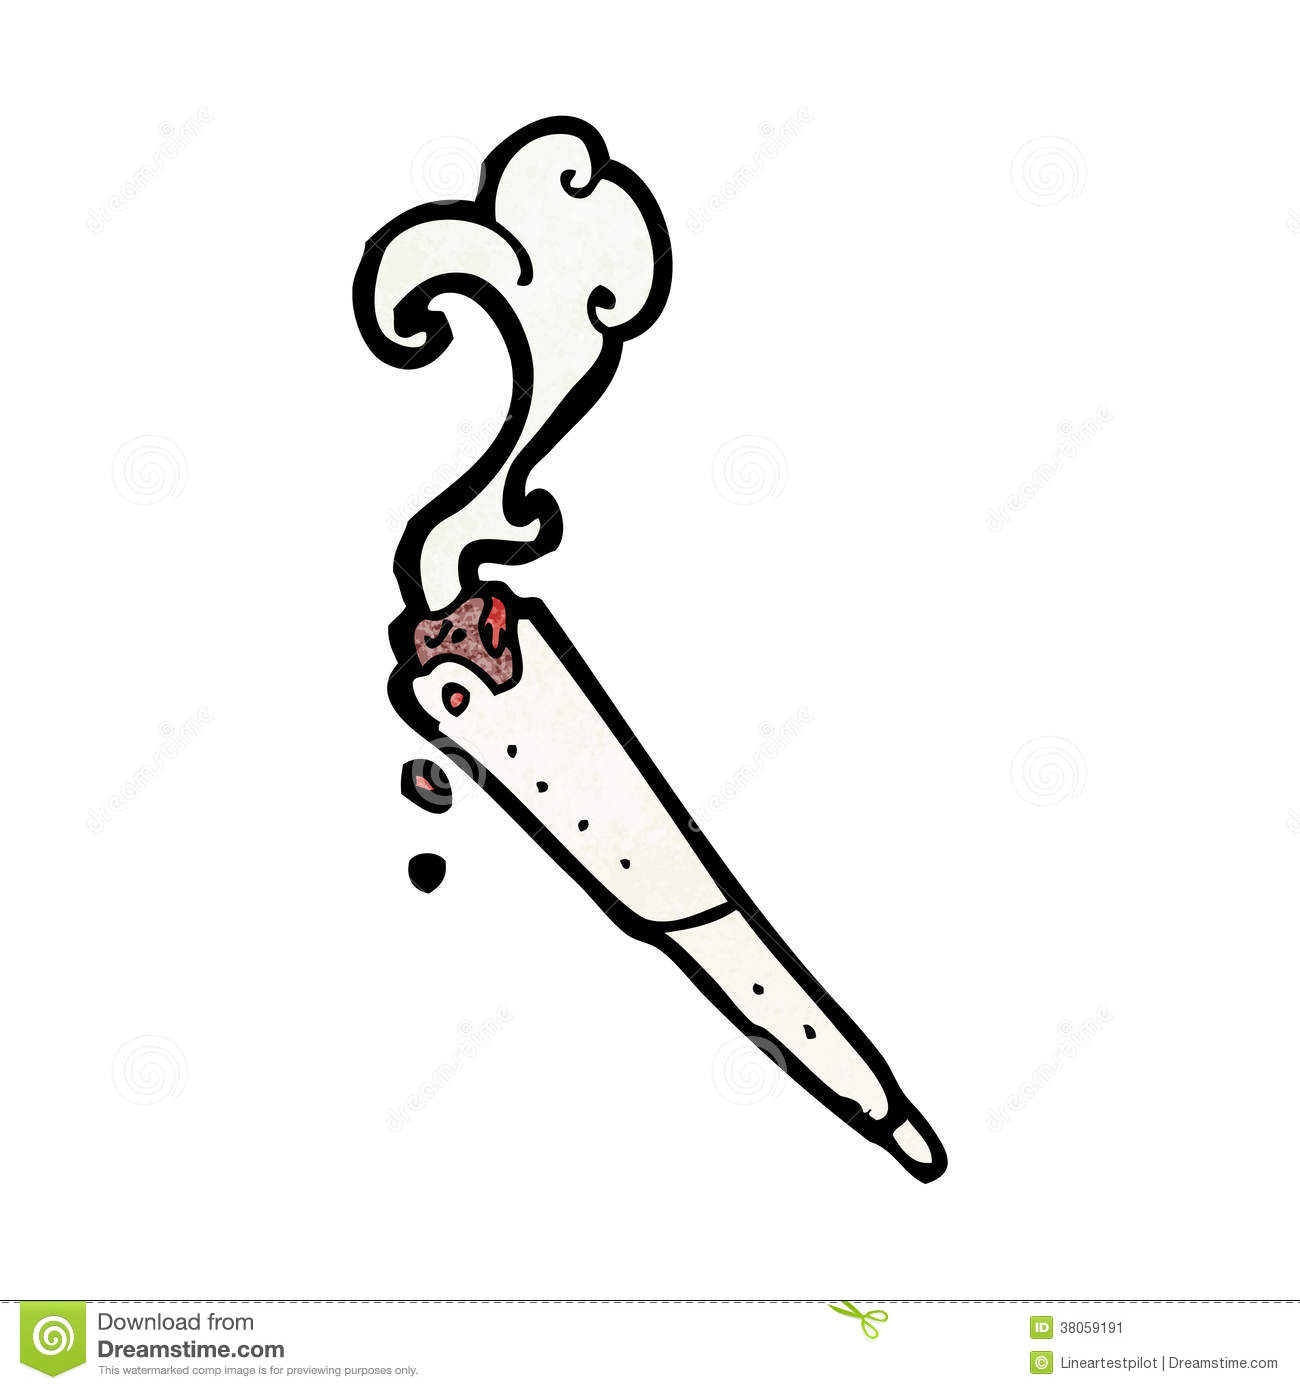 Blunt clipart black and white.  collection of high